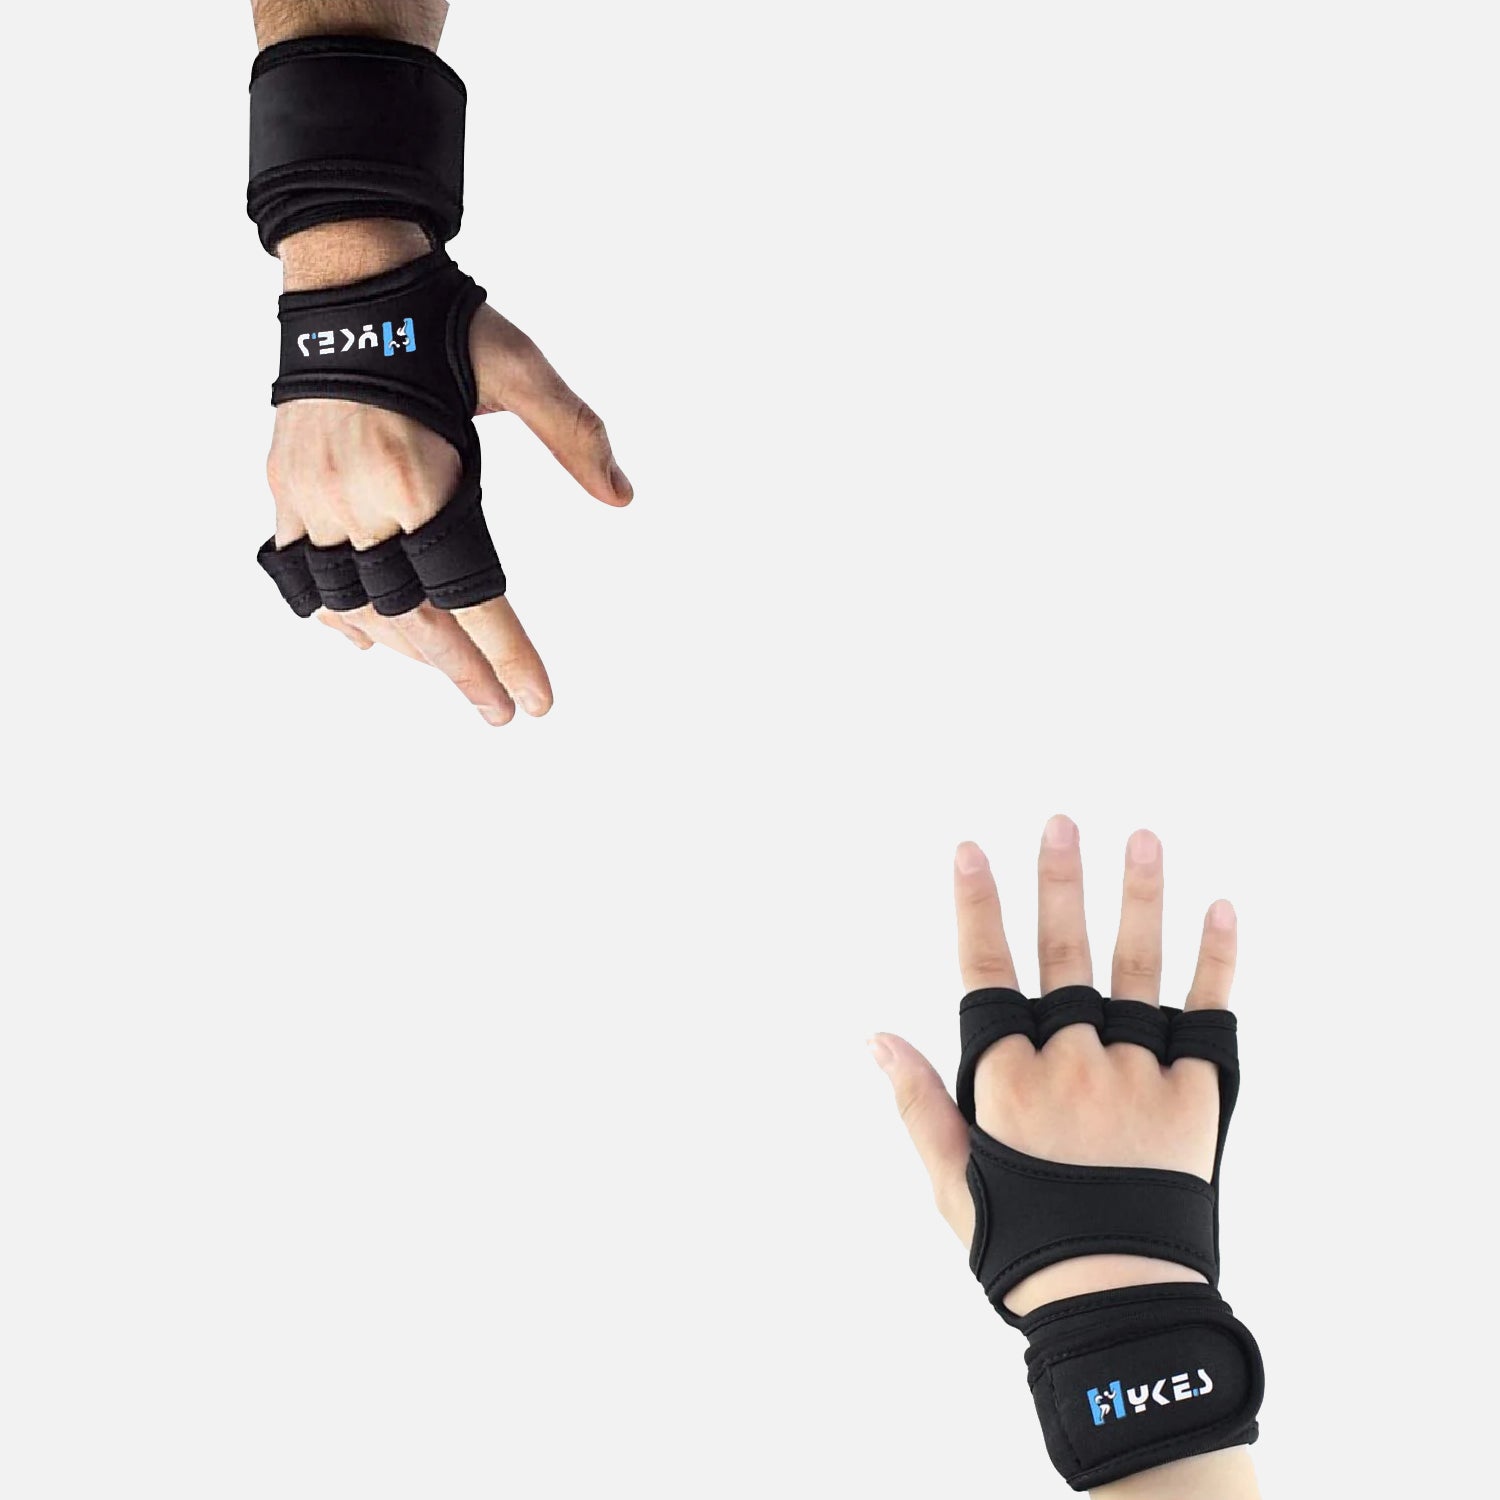 Crossfit Gloves and Weight Lifting Gloves for Men & Women